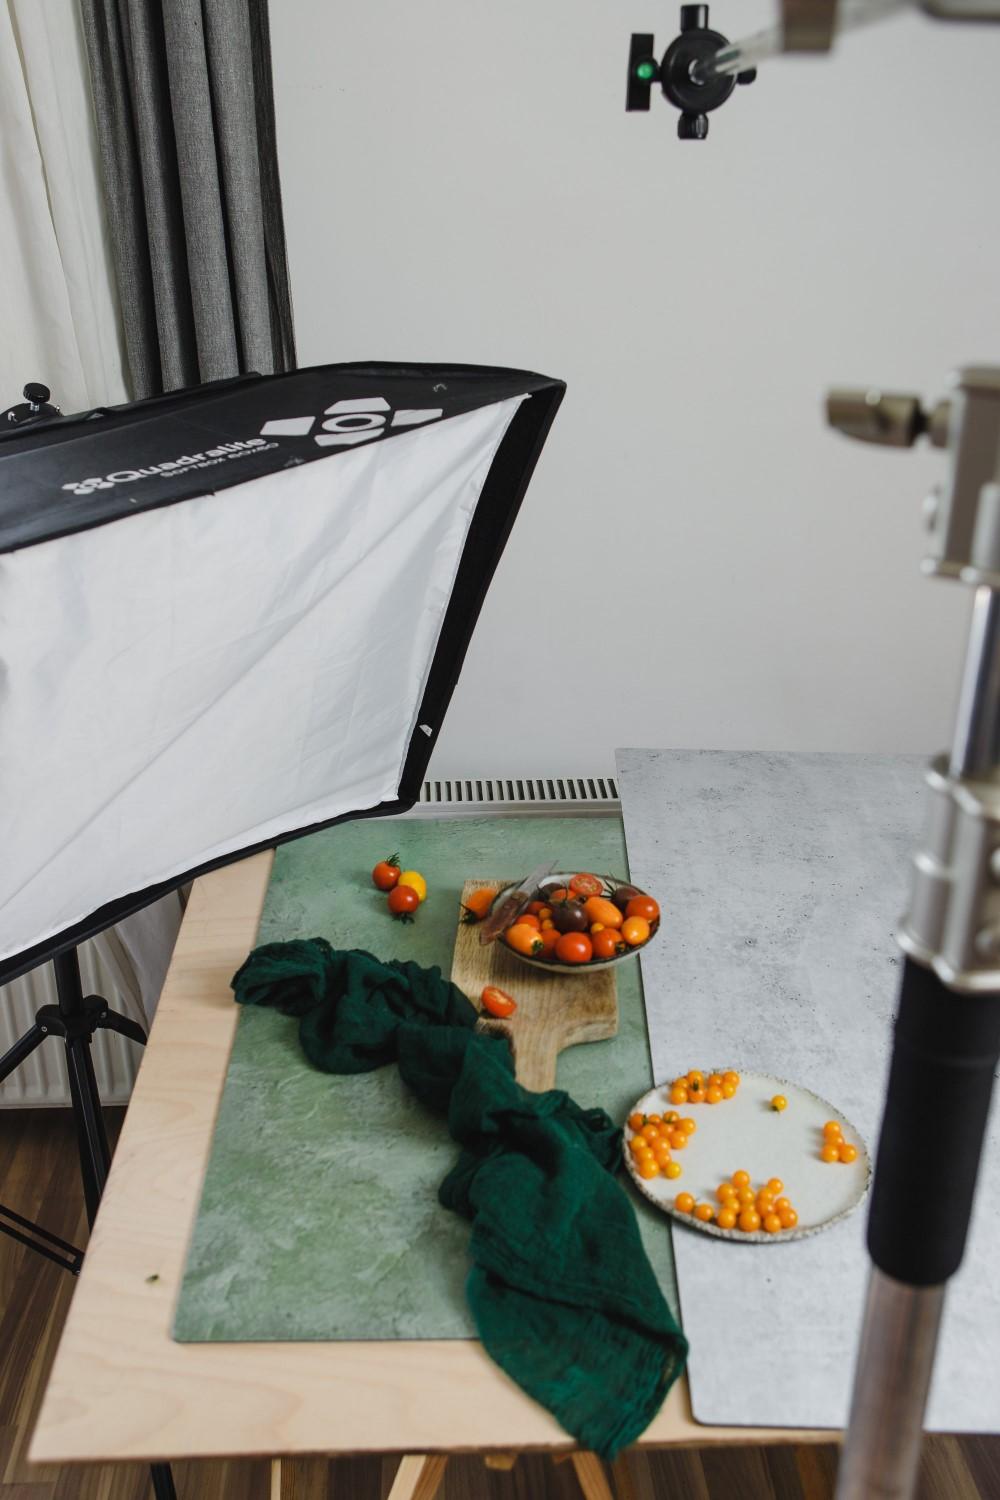 Let's talk about food photography equipment because who doesn't love a chat about what gear you need as a professional food photographer?